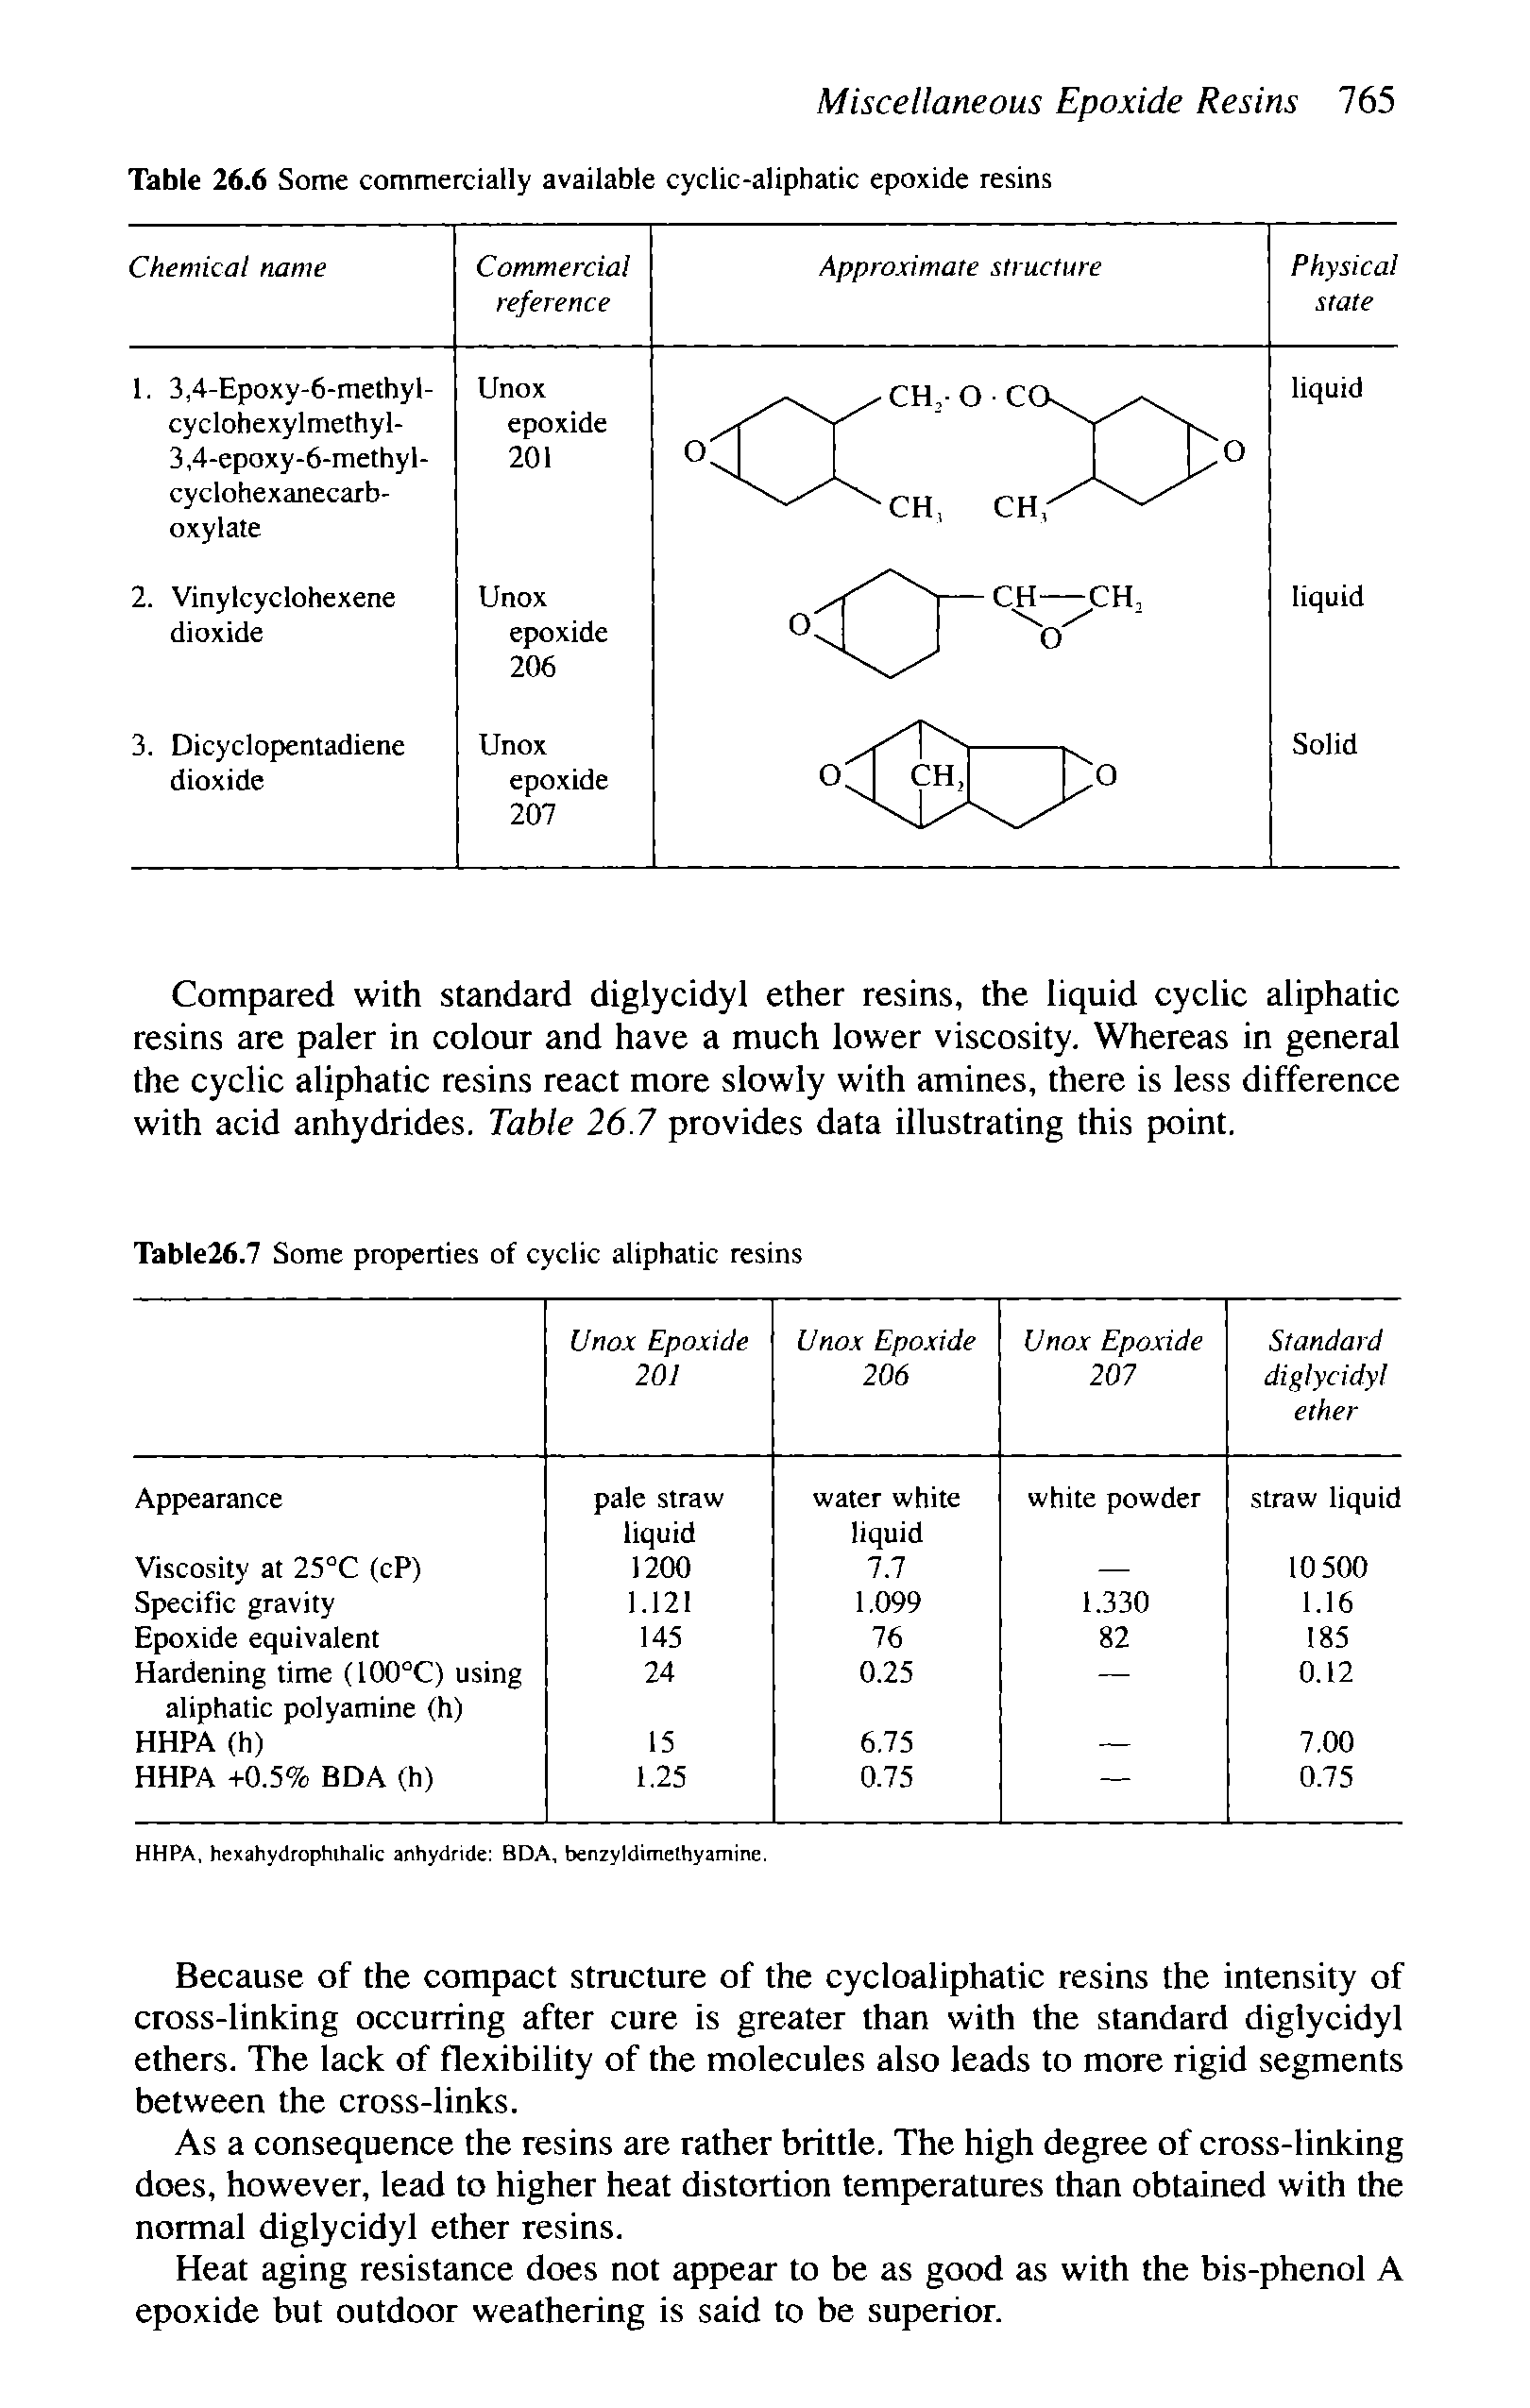 Table26.7 Some properties of cyclic aliphatic resins...